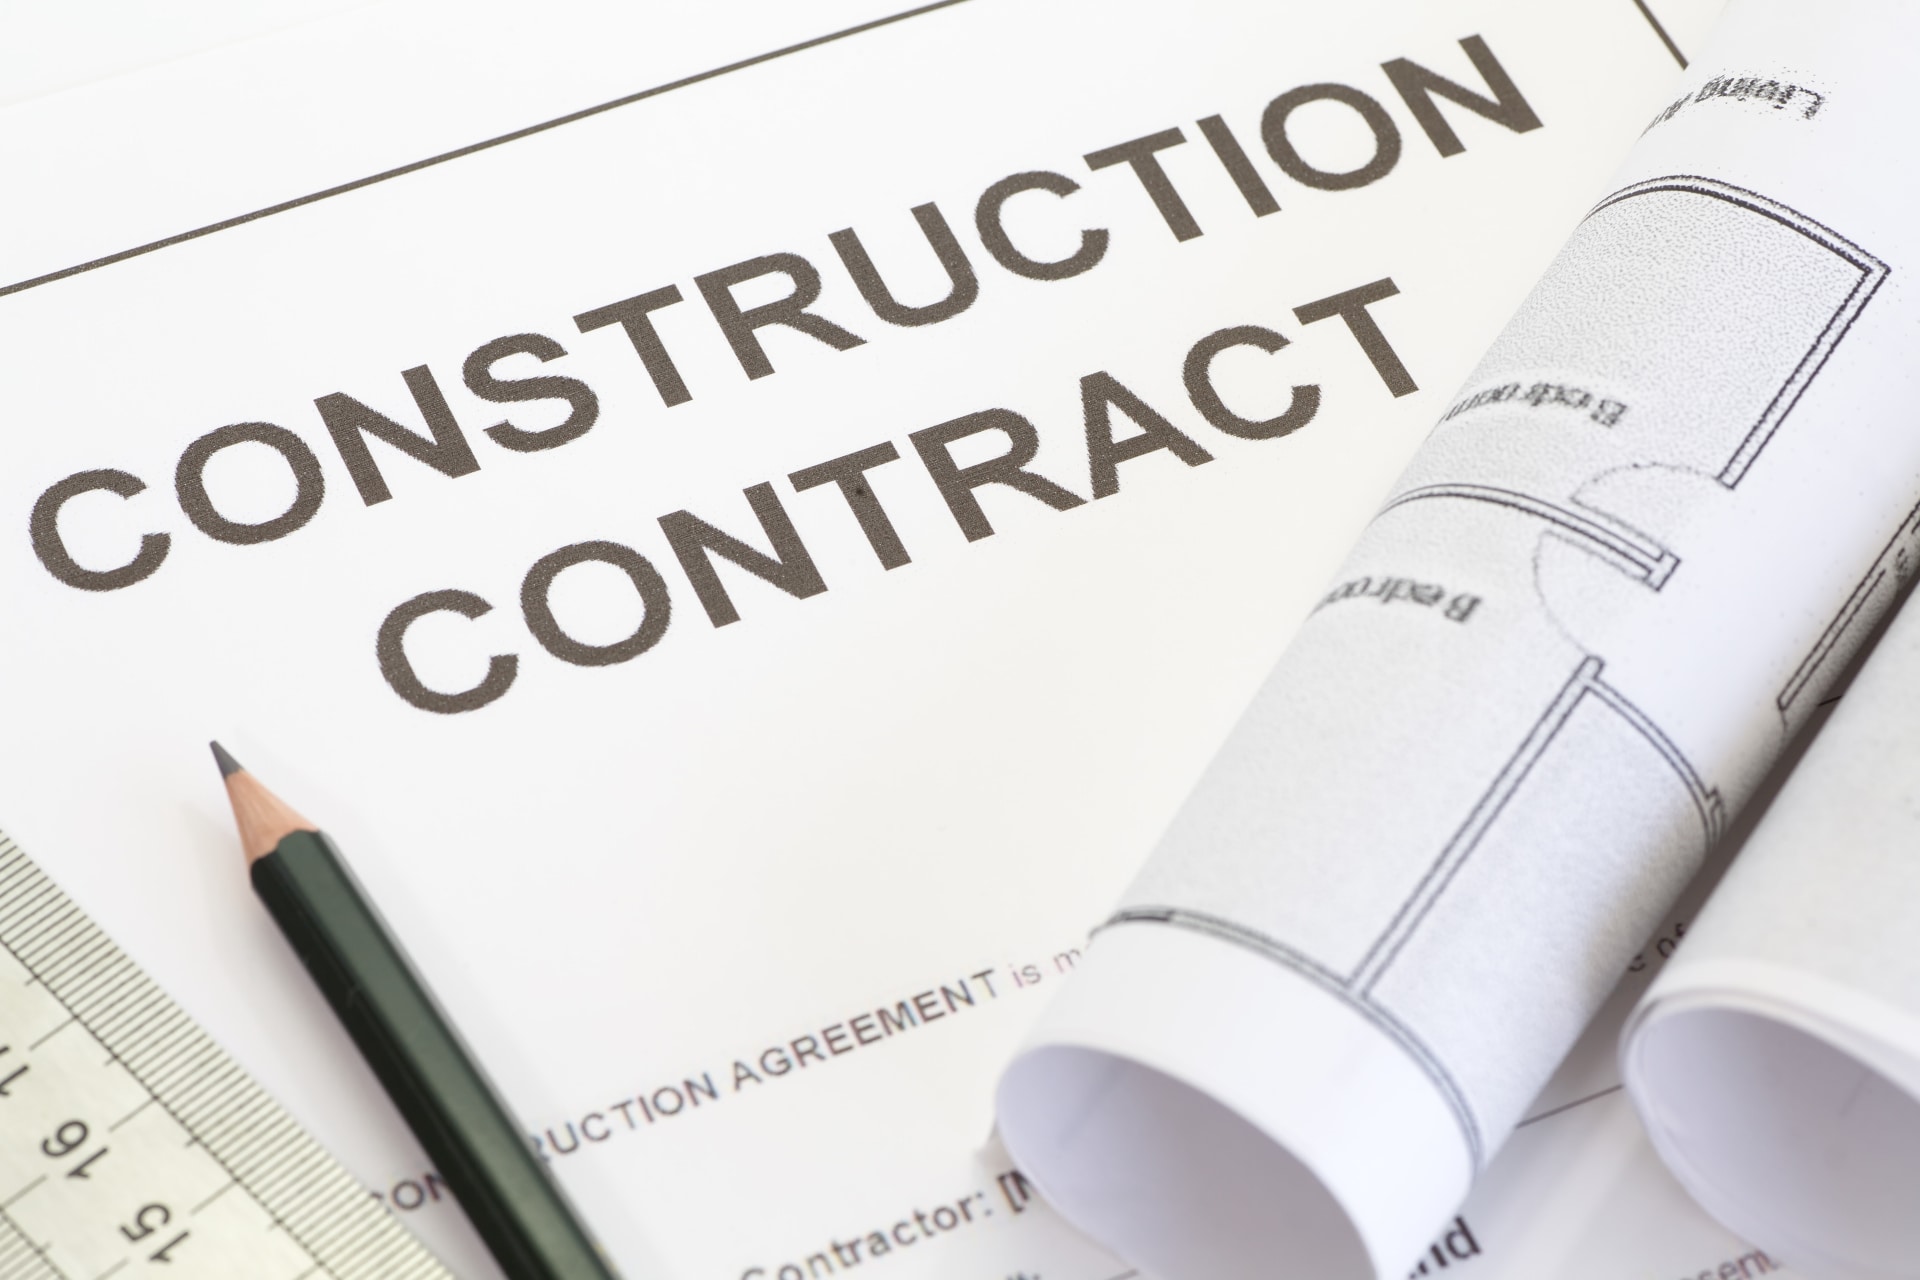 Bid Results & Construction Contracts